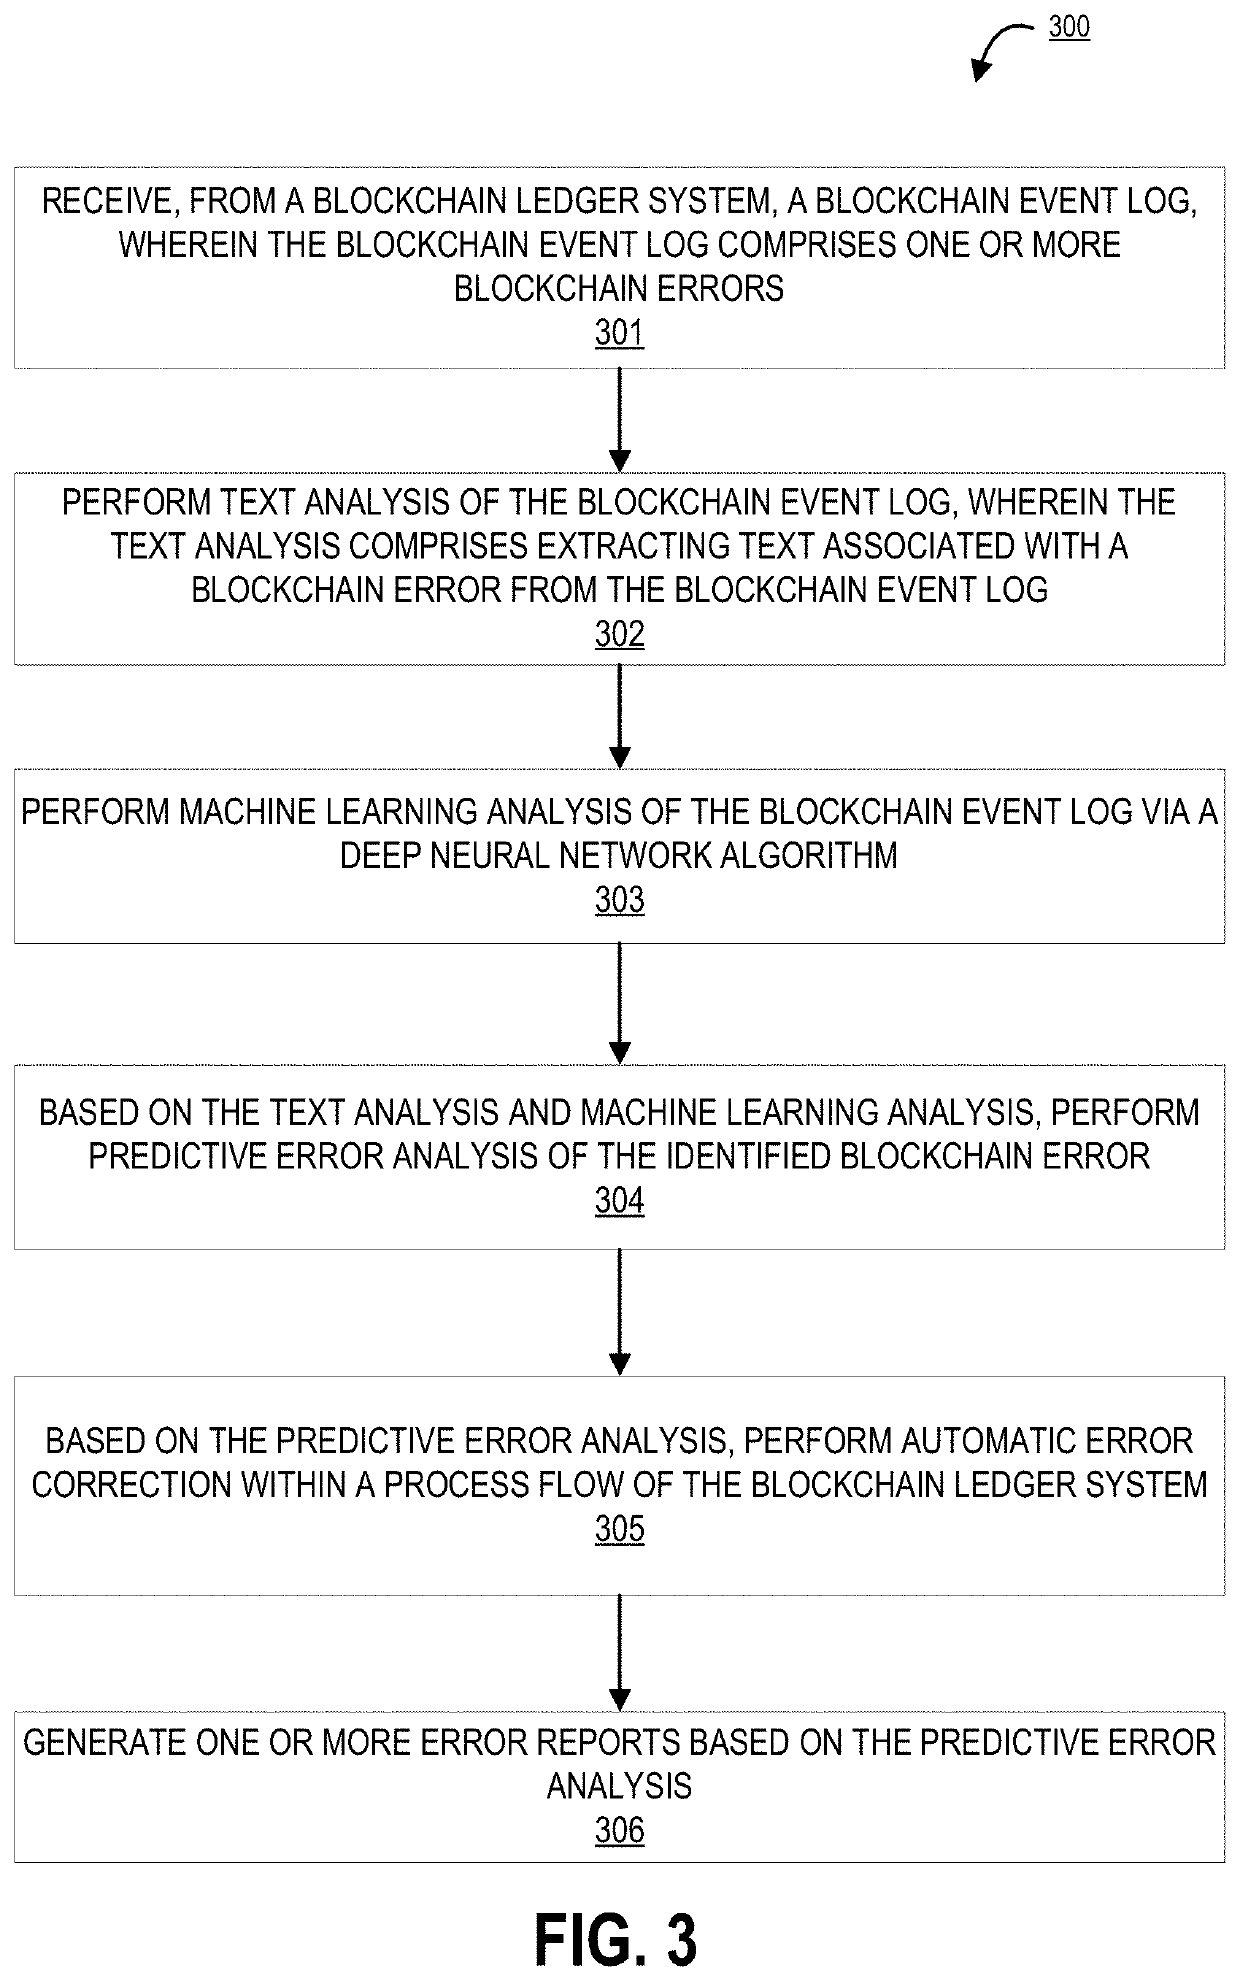 Automated system for intelligent error correction within an electronic blockchain ledger